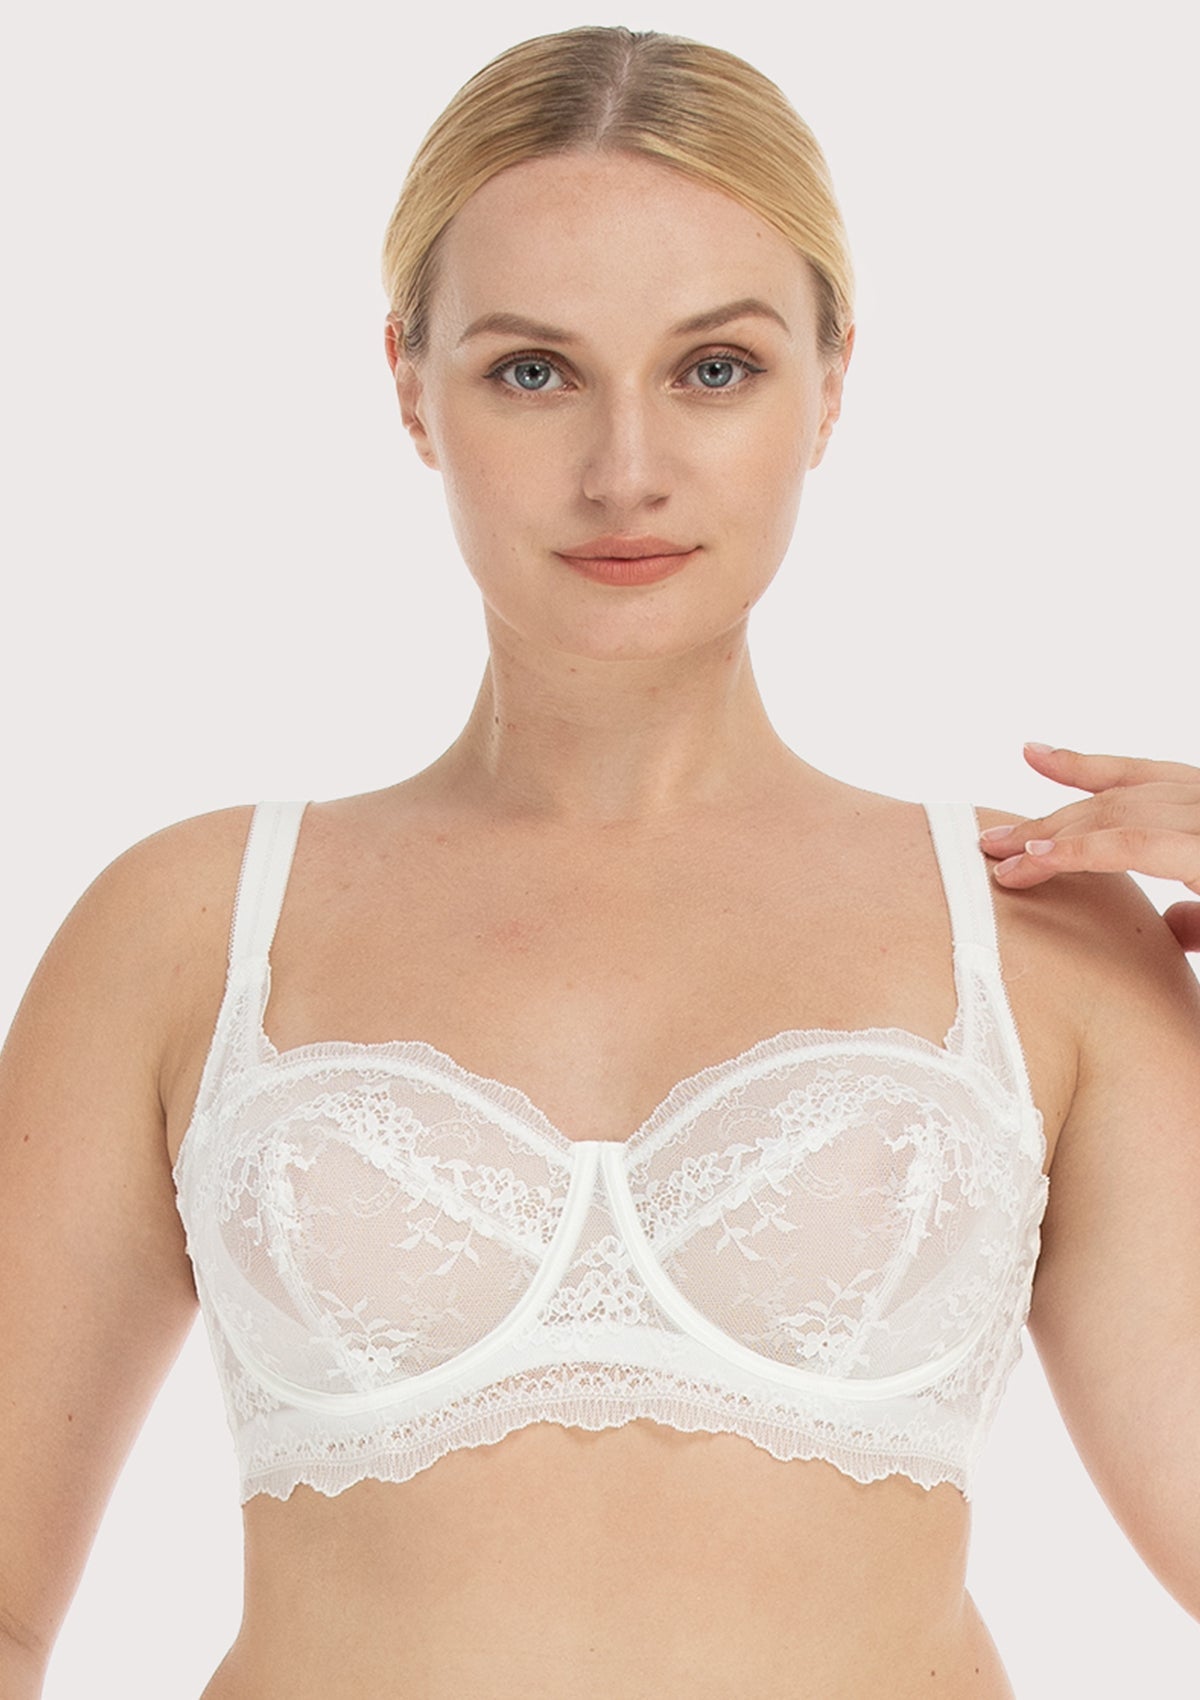 HSIA I Do Floral Lace Bridal Balconette Beautiful Bra For Special Day - Pink / 34 / D